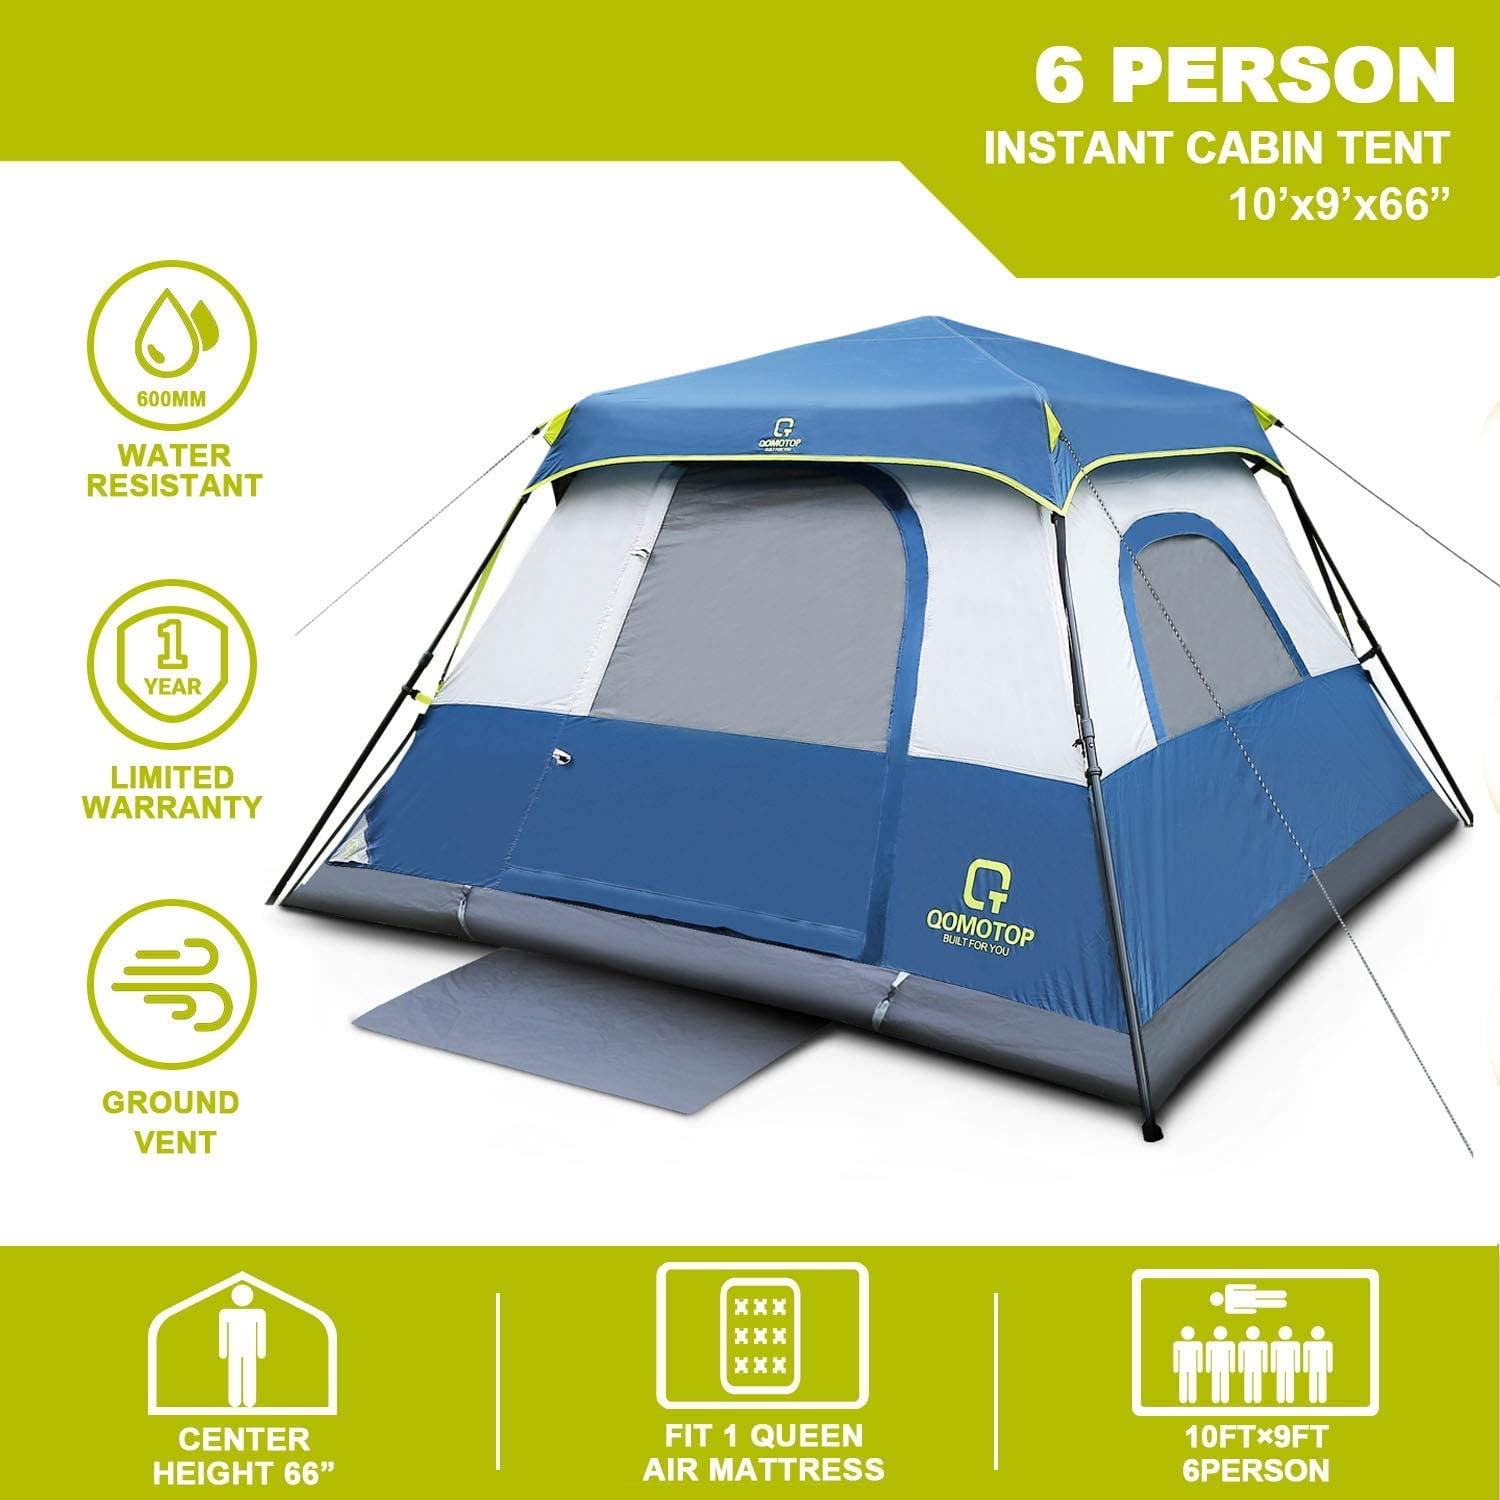 4-6 Person Inflatable Cabin Camping Tent with Canopy, Picnic Blanket -  Waterproof, Easy Setup